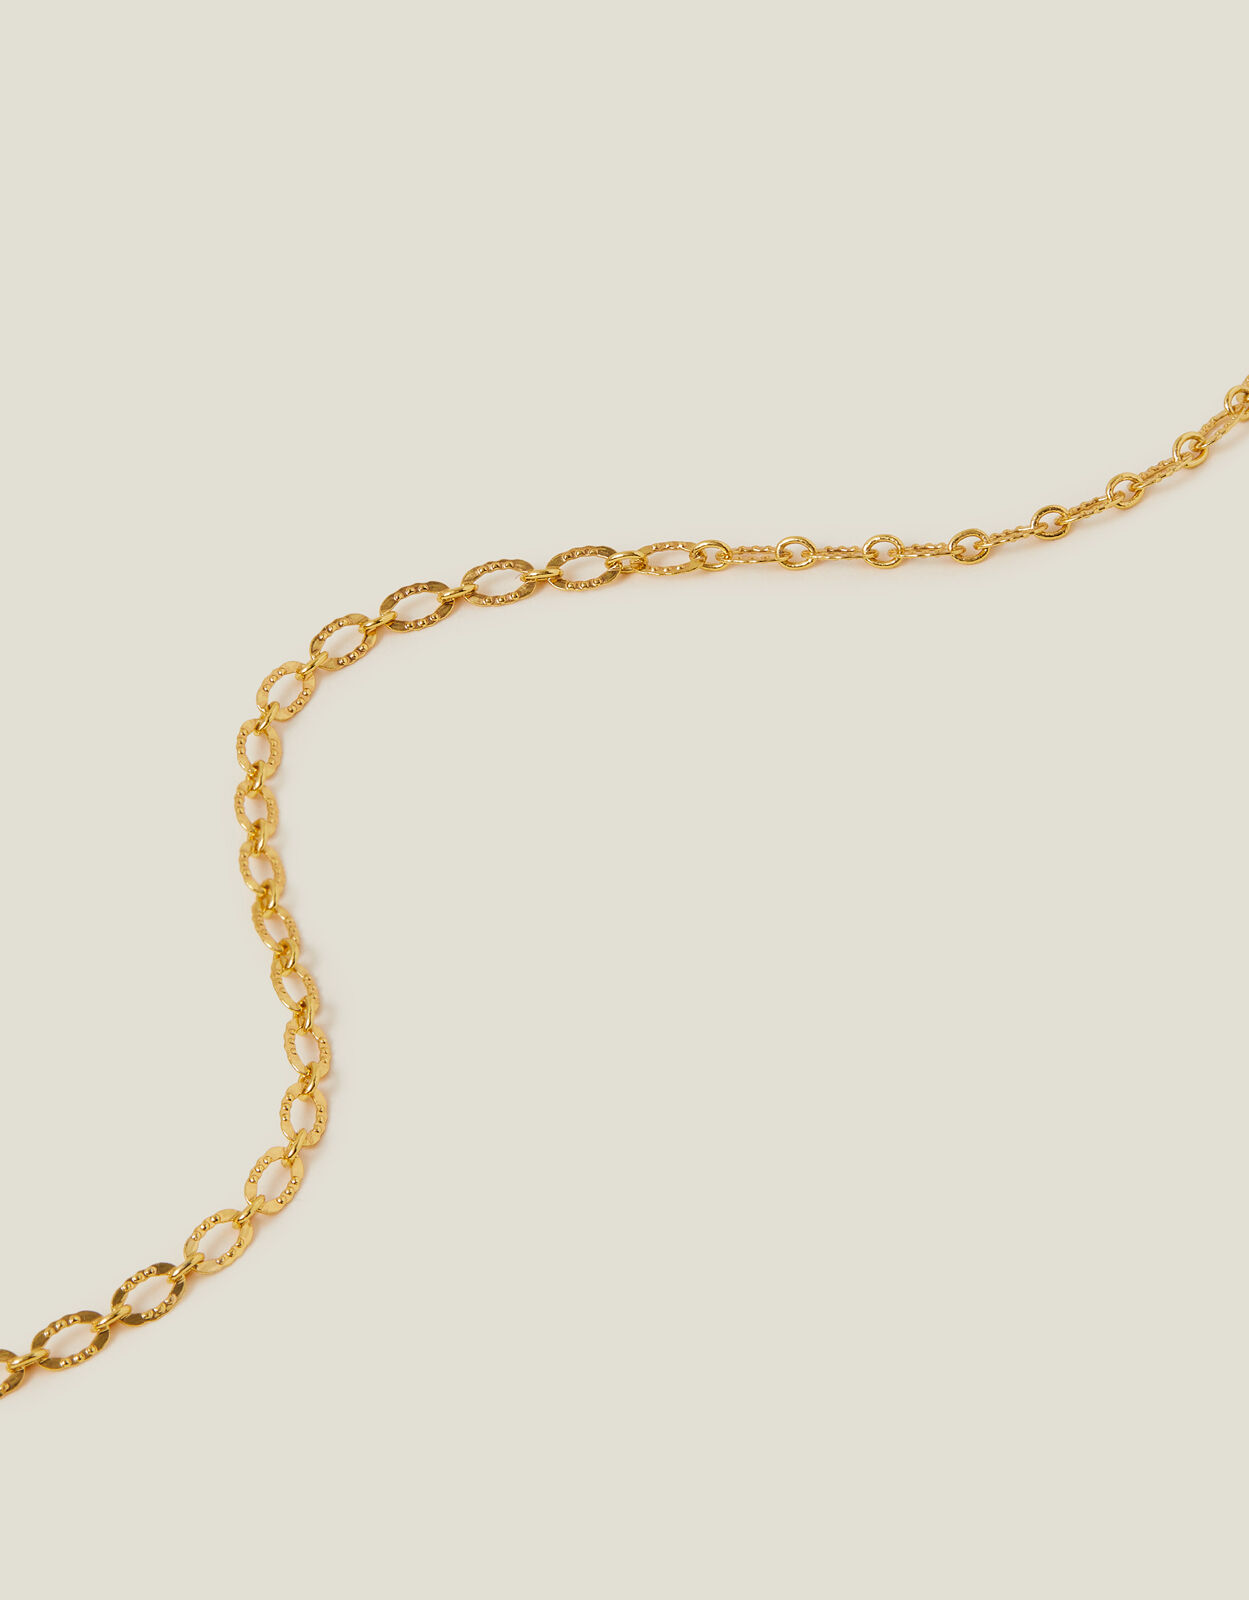 14ct Gold-Plated Bobble Chain Necklace